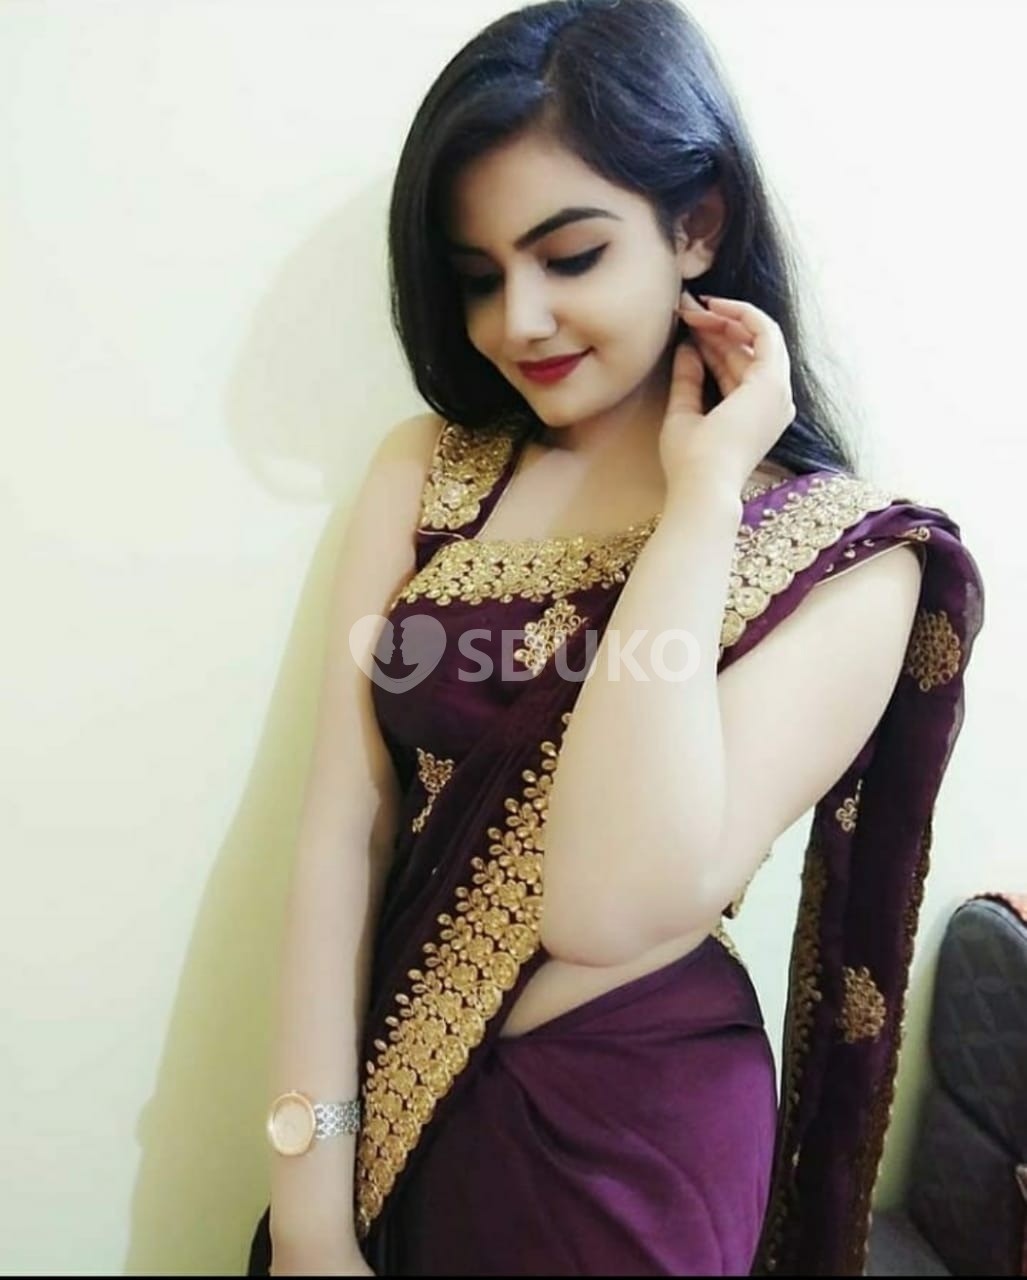 Jodhpur VIP LOW RATE (Kavya) ESCORT FULL HARD FUCK WITH NAUGHTY IF YOU WANT TO FUCK MY PUSSY WITH BIG BOOBS GIRLS- CALL 